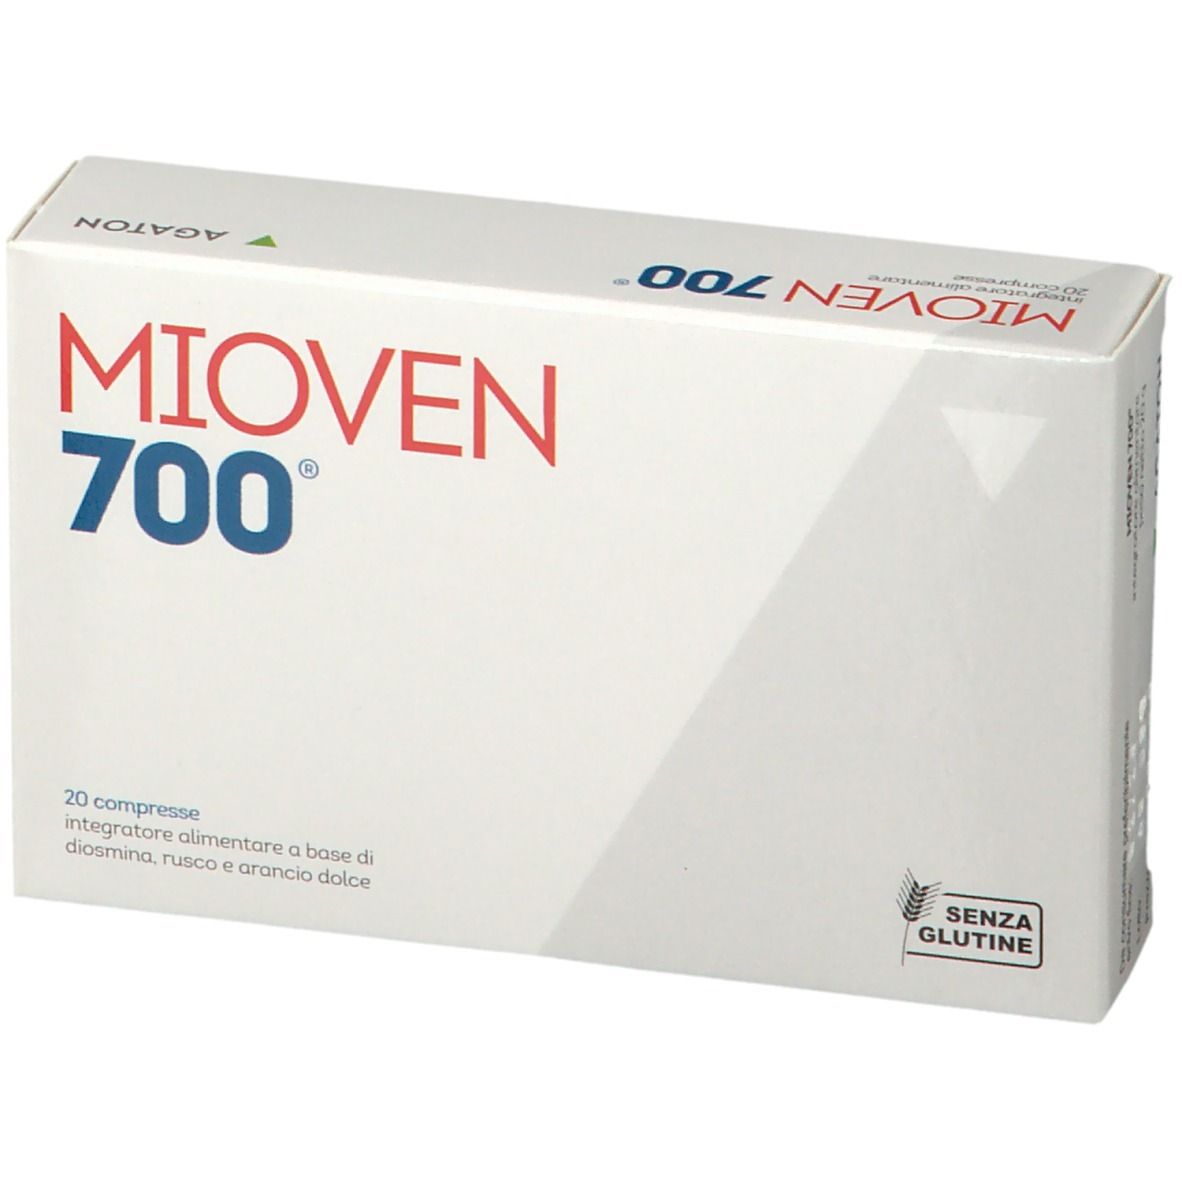 MIOVEN 700®